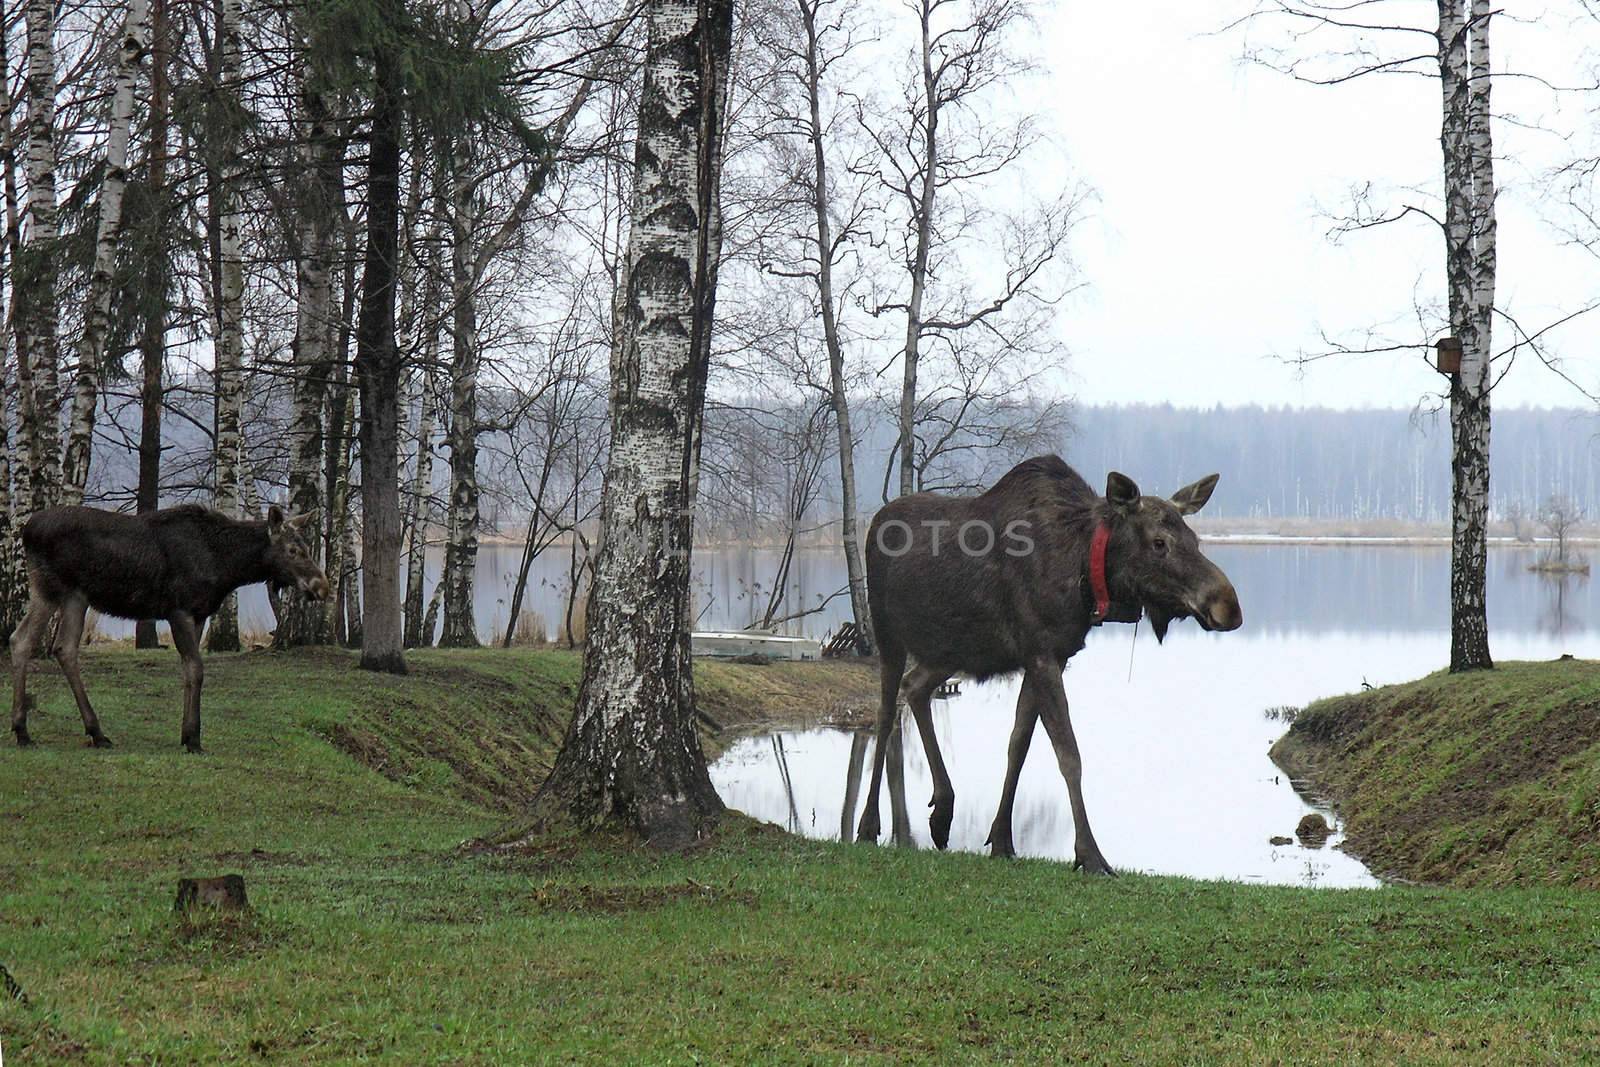 Elks on the river bank